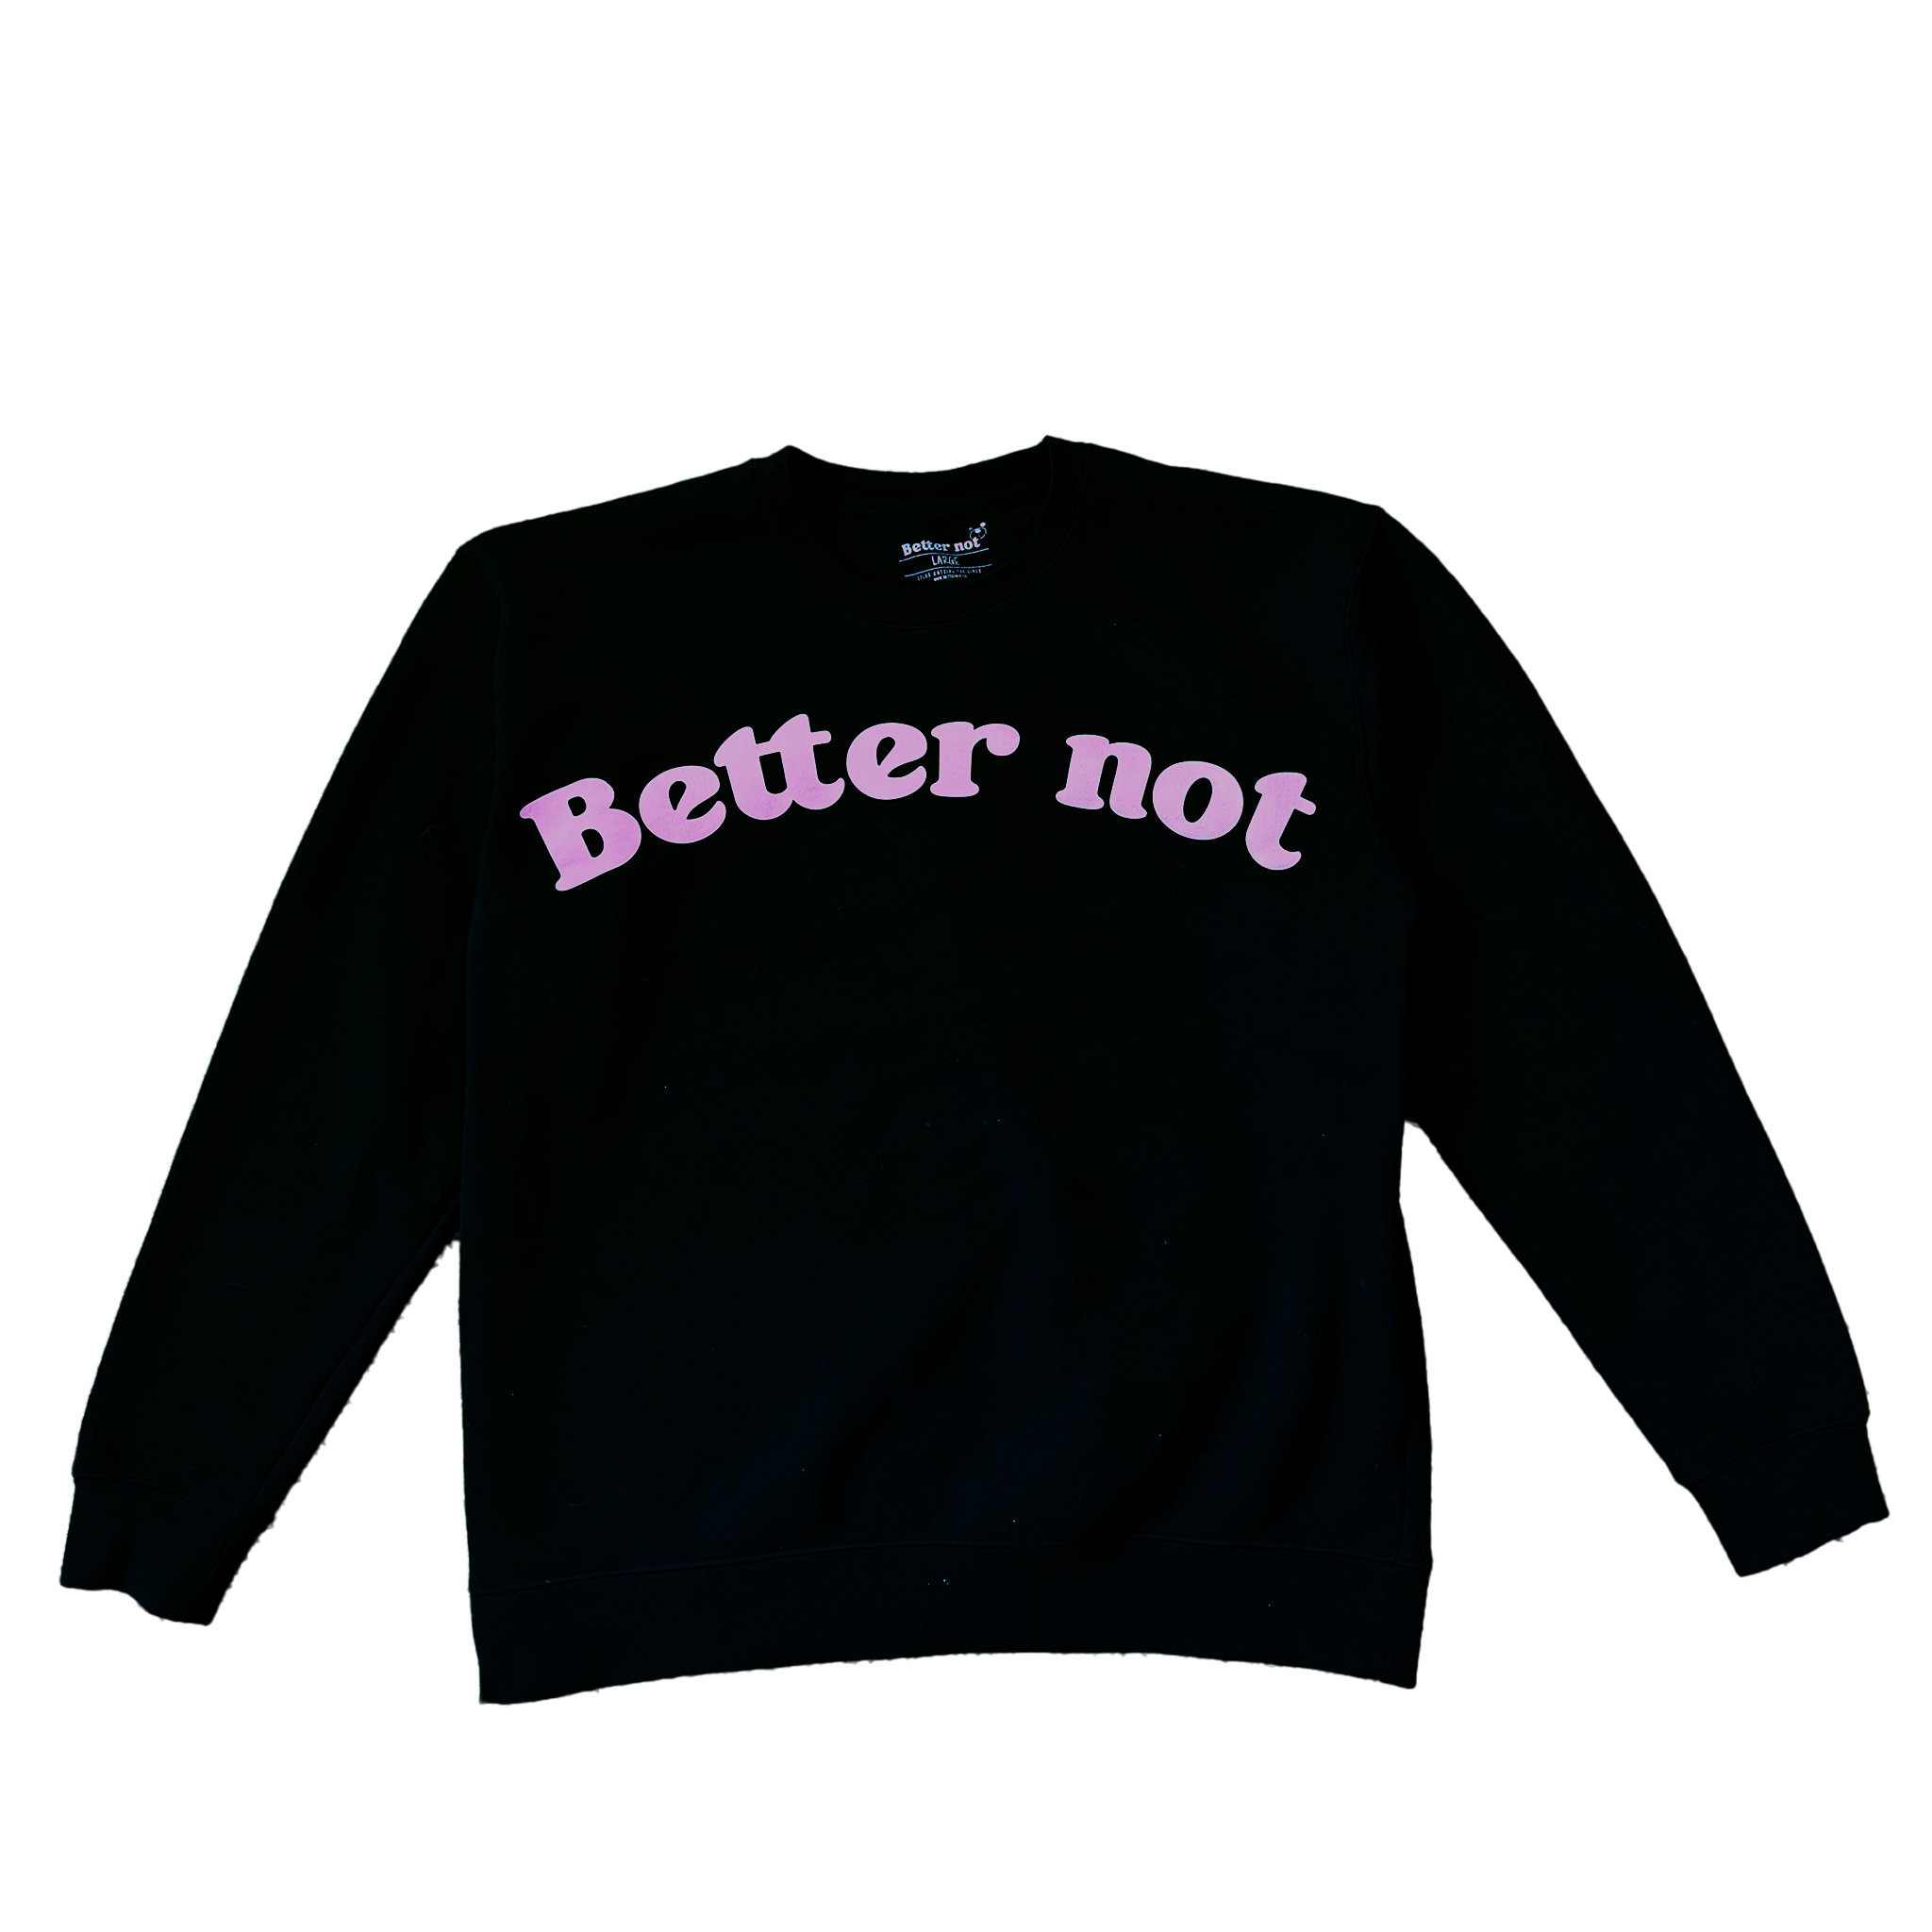 Black Staple Crew sweater from Better not with pink text displayed on a textured premium fleece background.